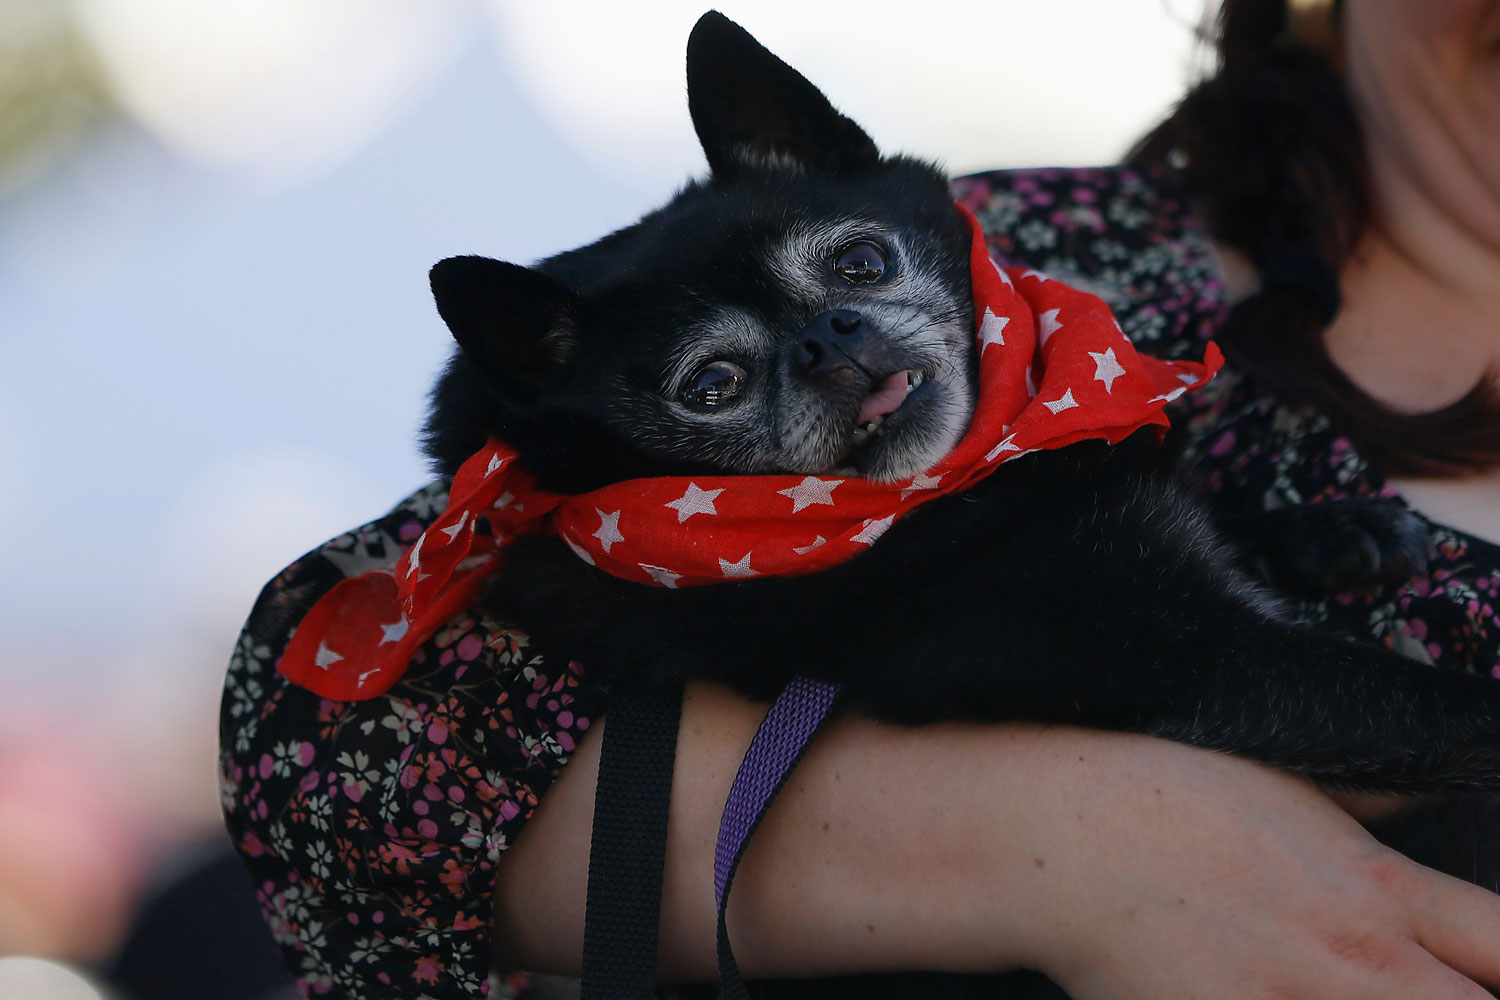 Prince Austin, a Pug Pomeranian mix, is presented during the competition.